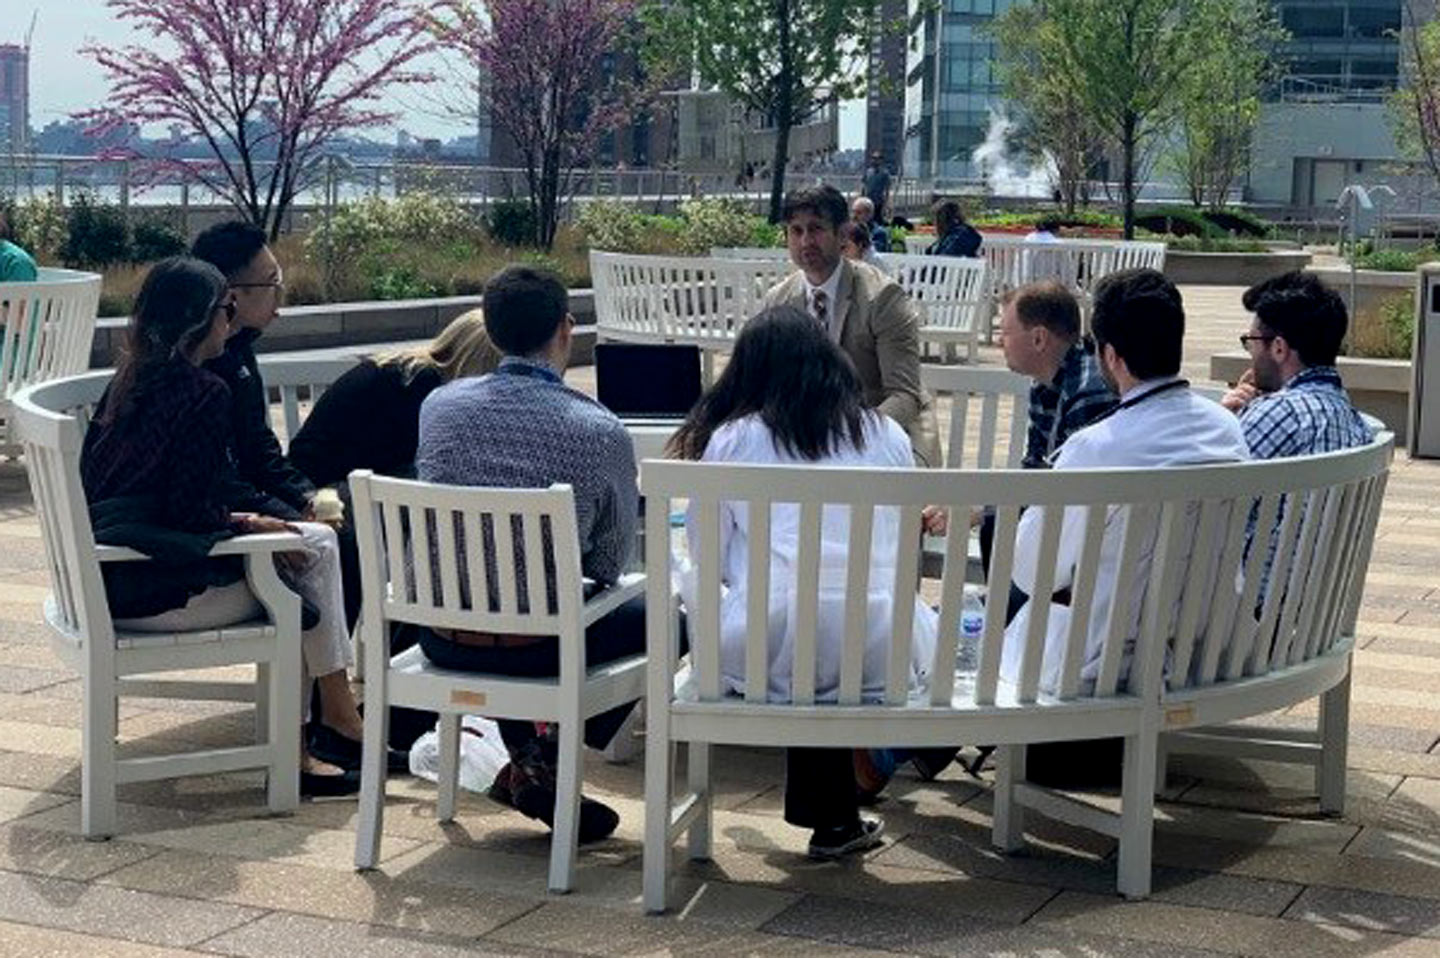 Residents Attend an Outside Lecture on the East River Riverfront